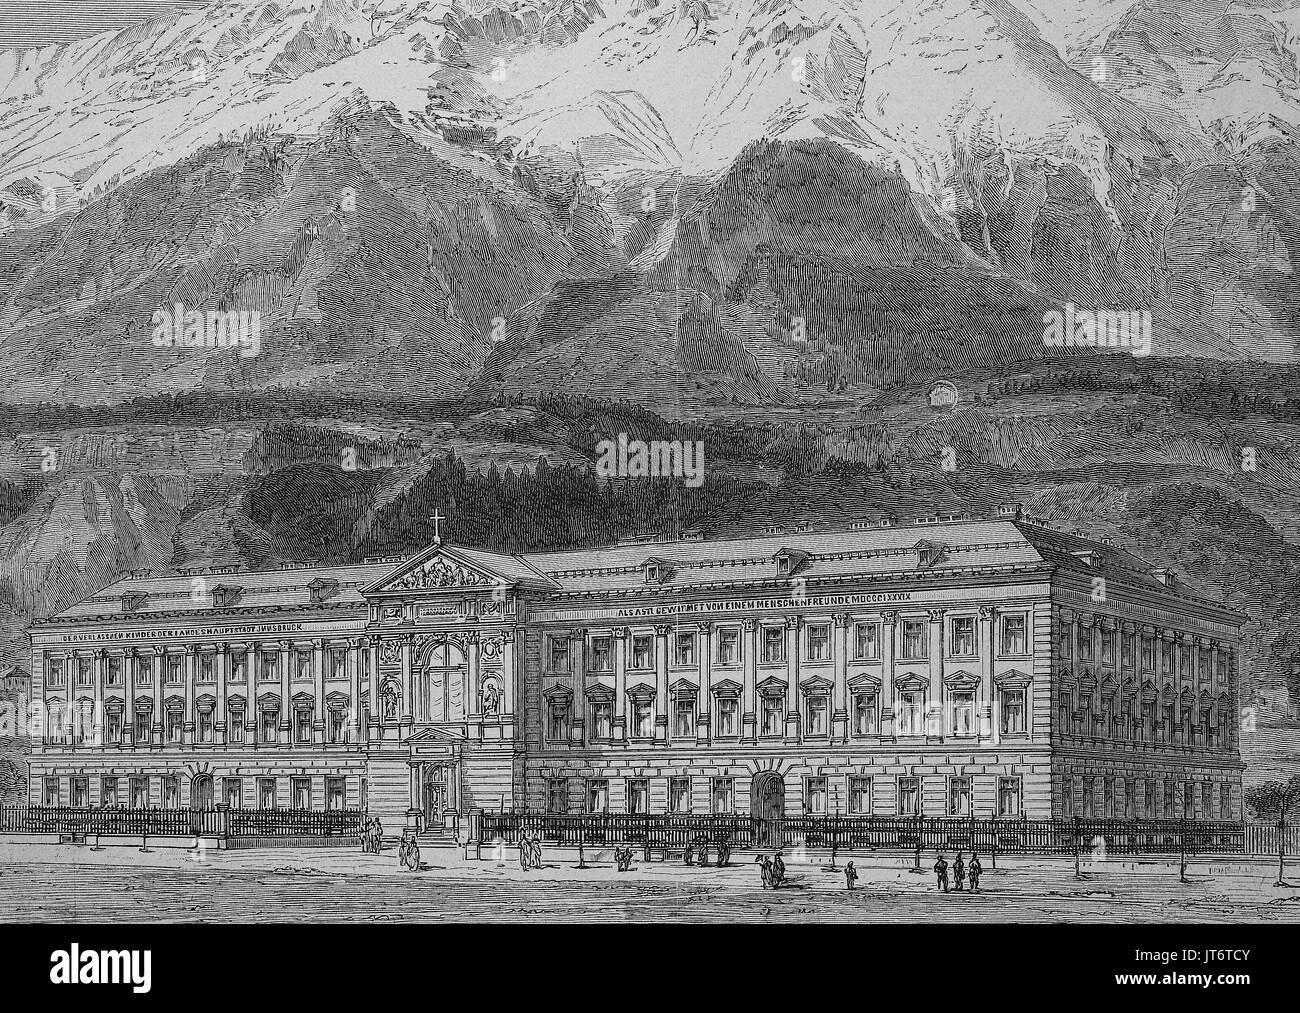 The orphanage of Sieberer in Innsbruck, Austria, Digital improved reproduction of an image published between 1880 - 1885 Stock Photo